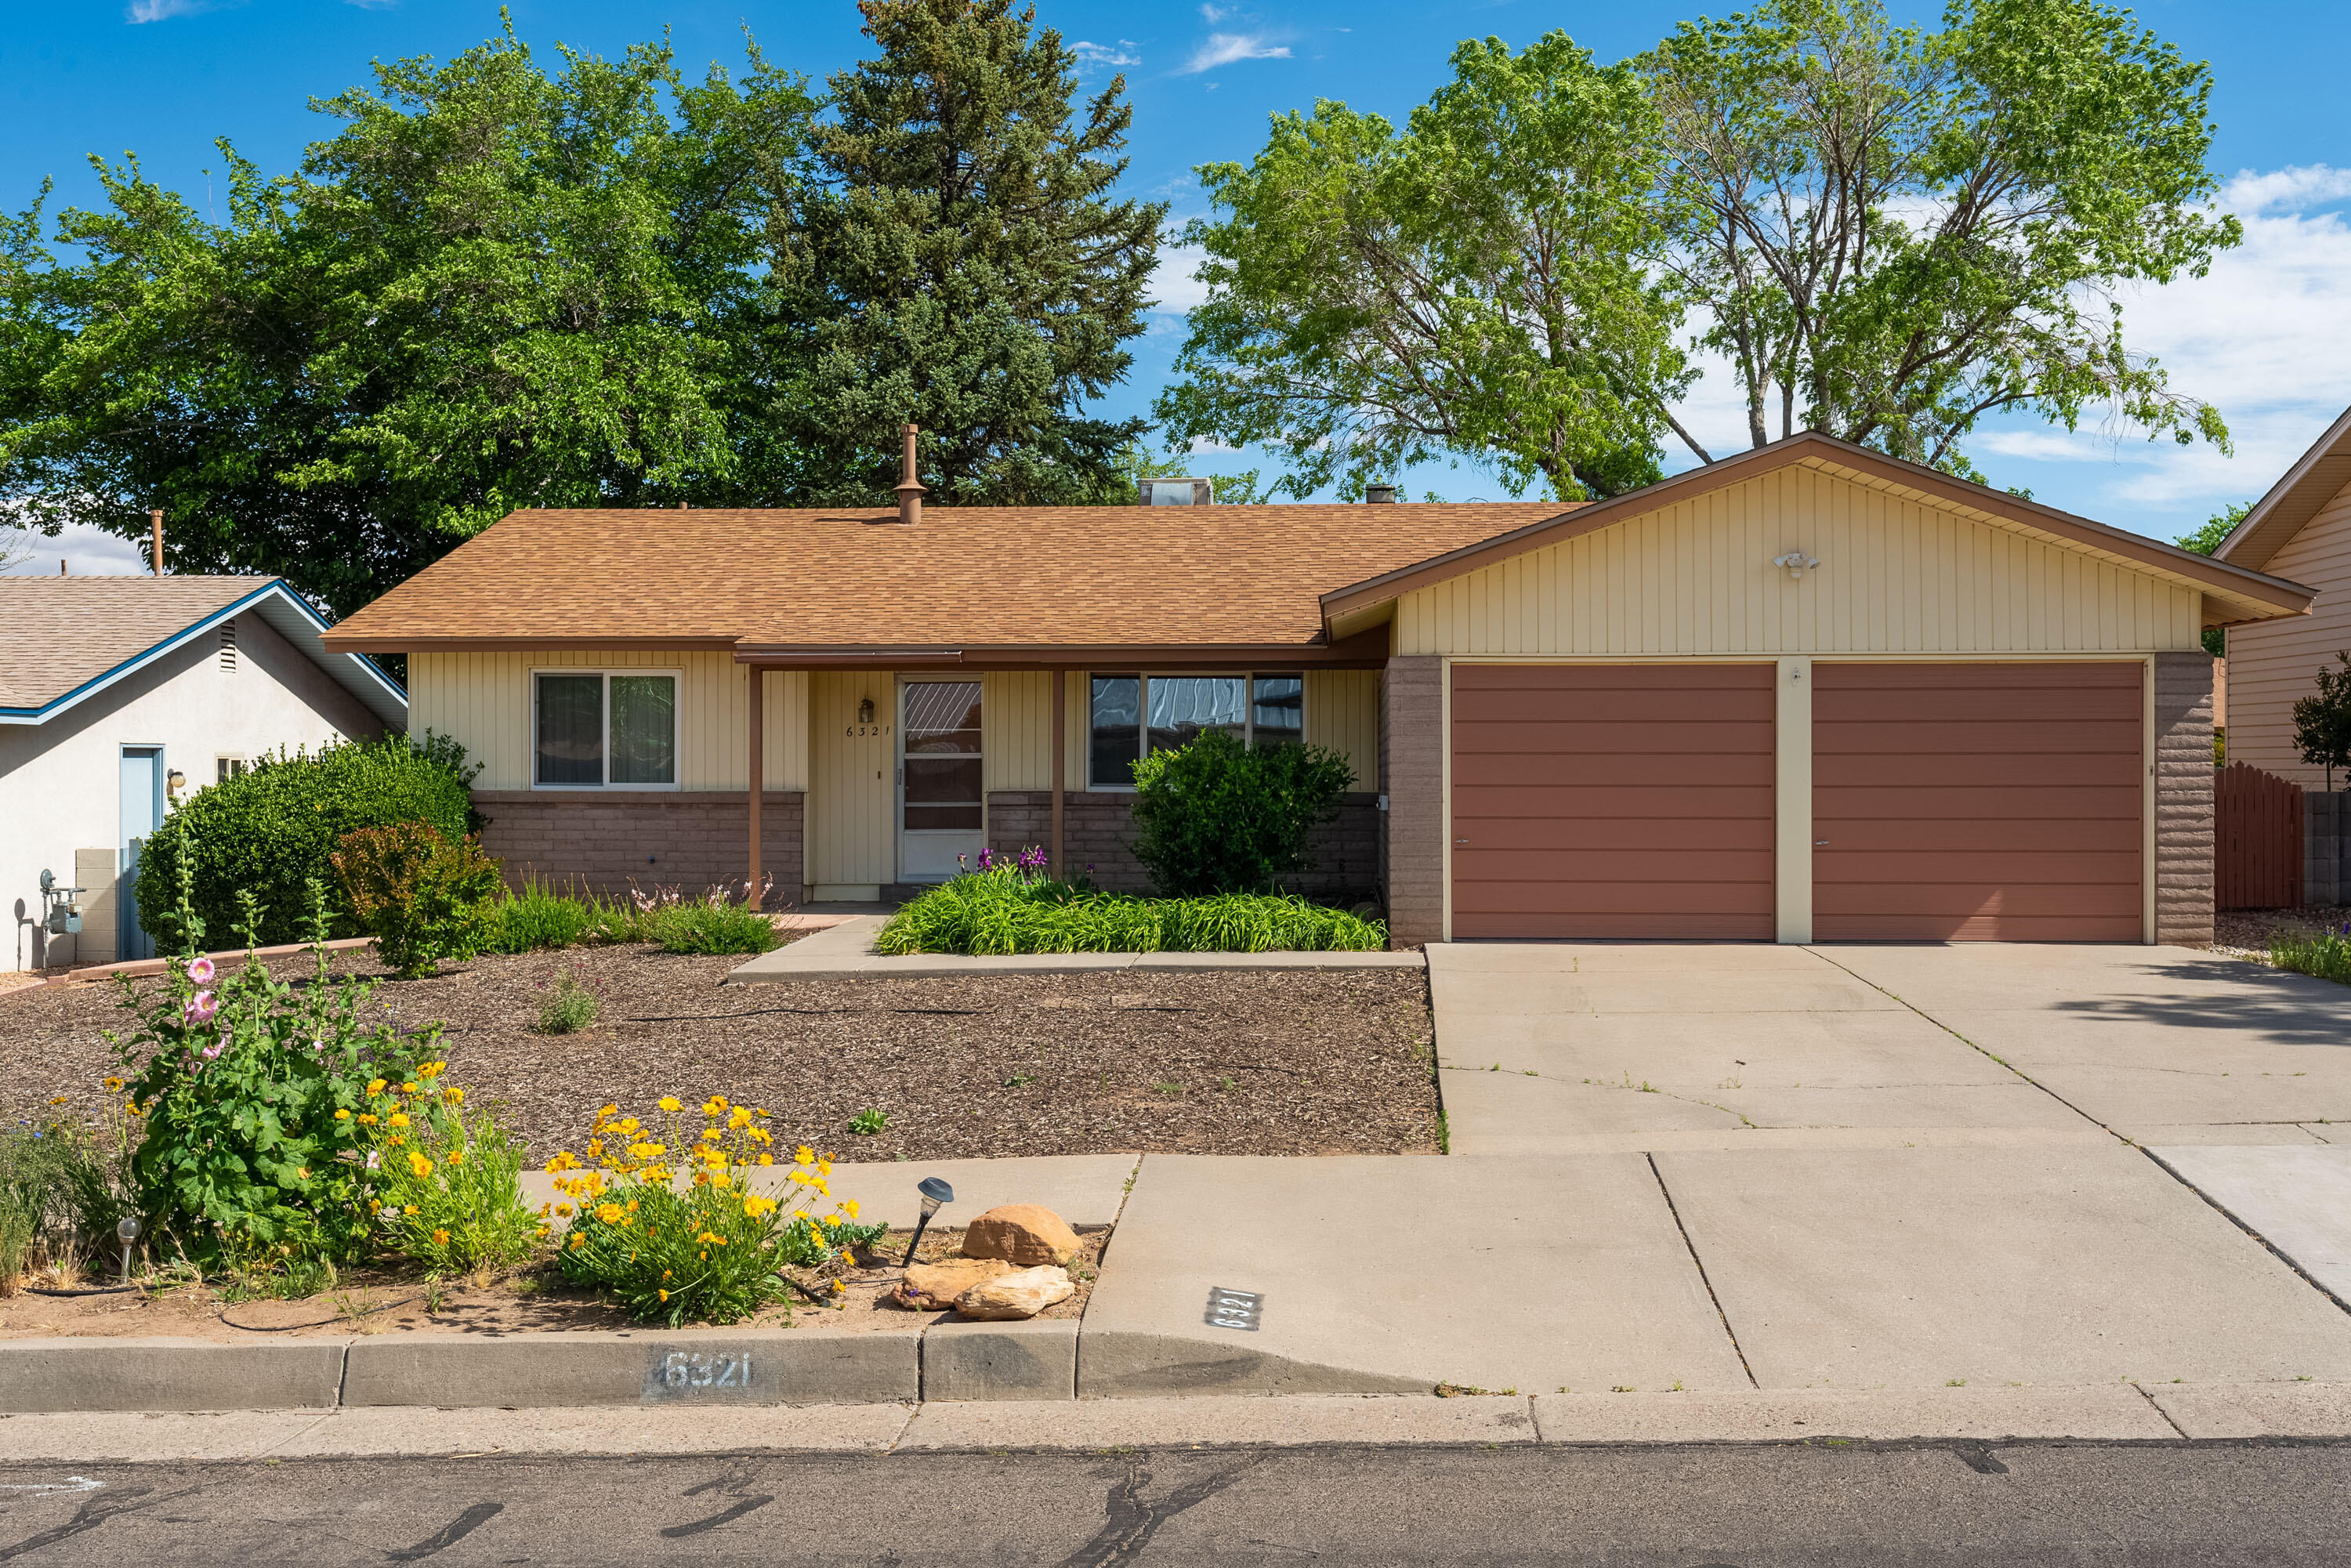 Ideal location, near restaurants and shopping, Only minutes to I-25. This 3 bedroom, two bath is ready for new owners to make it their own. 1463 sqft, one level, and nicely kept.. price reflects updates to be needed. The home is situated on a nice size lot, with a good sized backyard. Don't miss this opportunity!